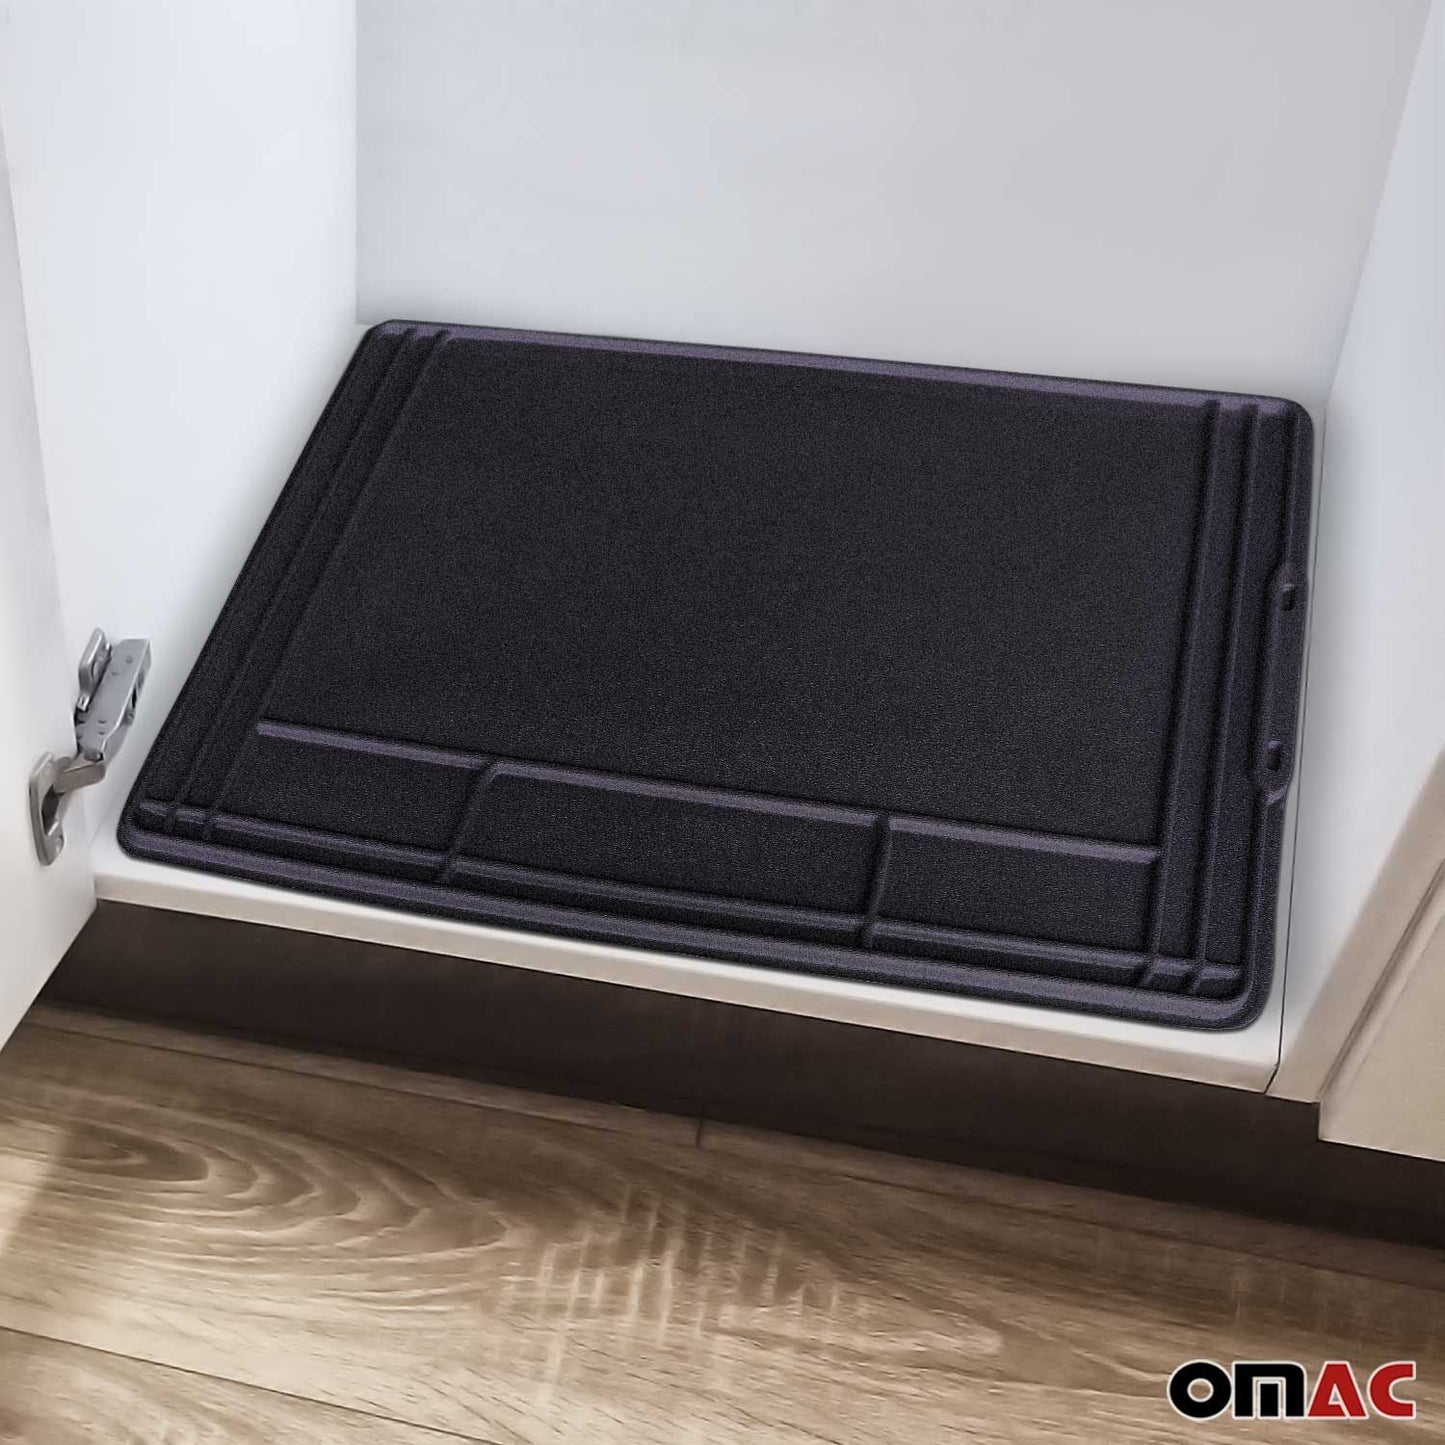 OMAC High Quality Kitchen Under Sink Cabinet Protection Mat Waterproof Raised Edge U022244